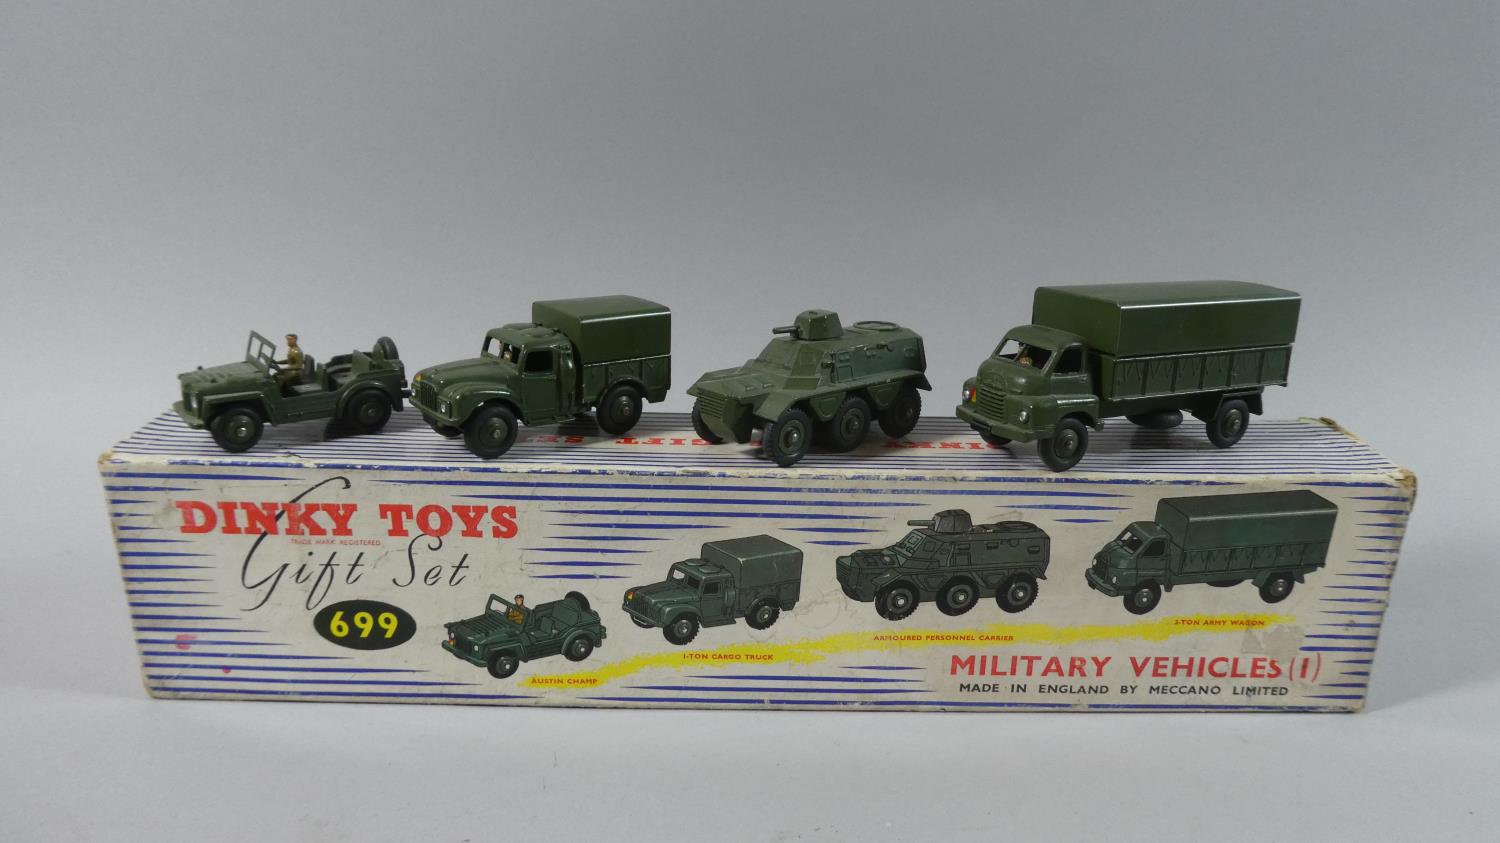 A Boxed Dinky Toys Gift Set Military Vehicles (1) No 699